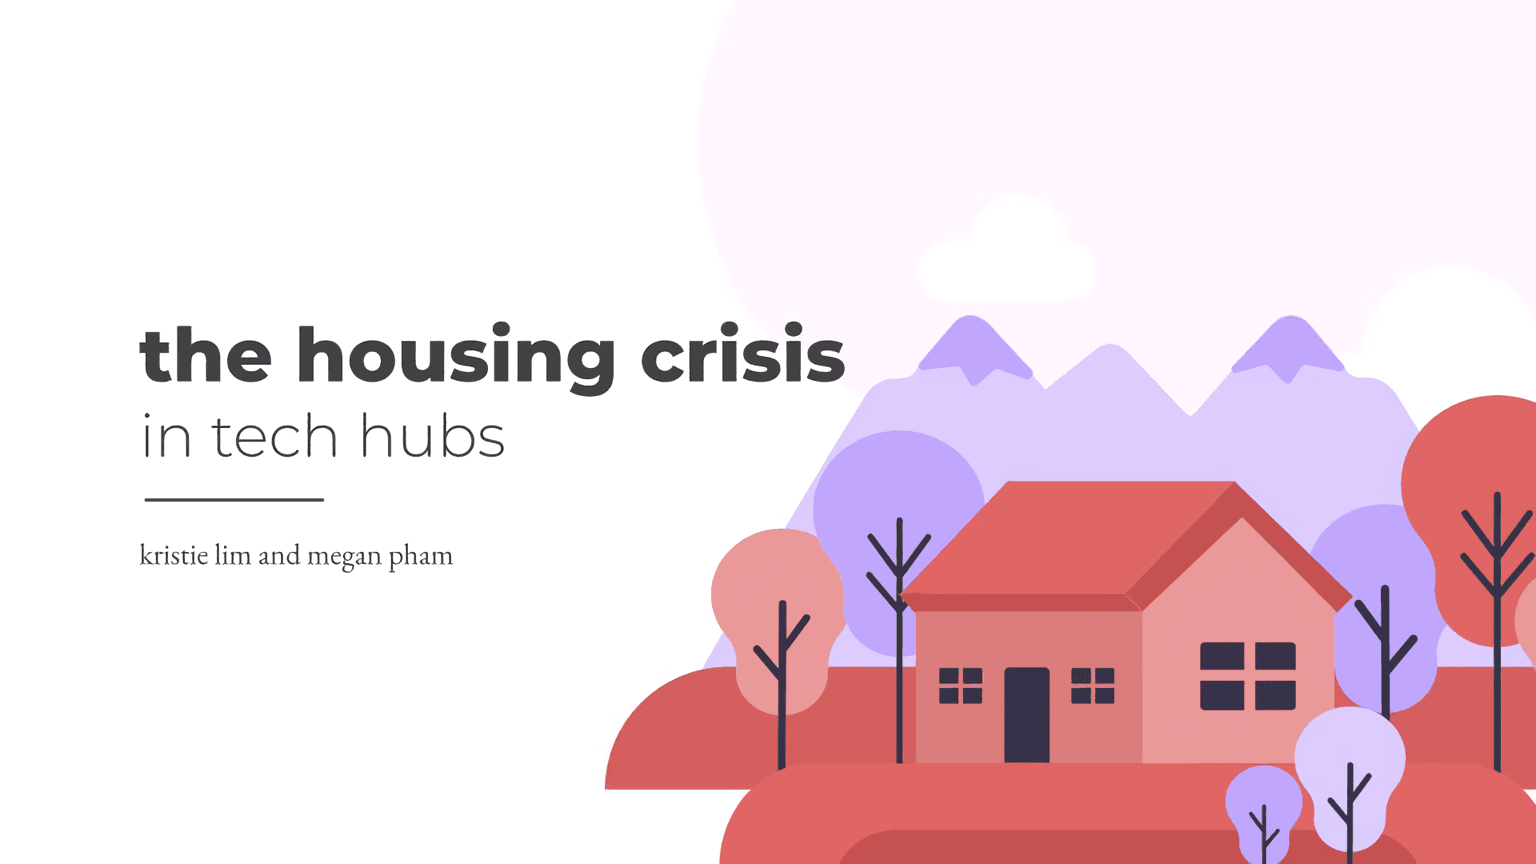 a slide titled "the housing crisis in tech hubs: kristie lim and megan pham", with a house and some trees